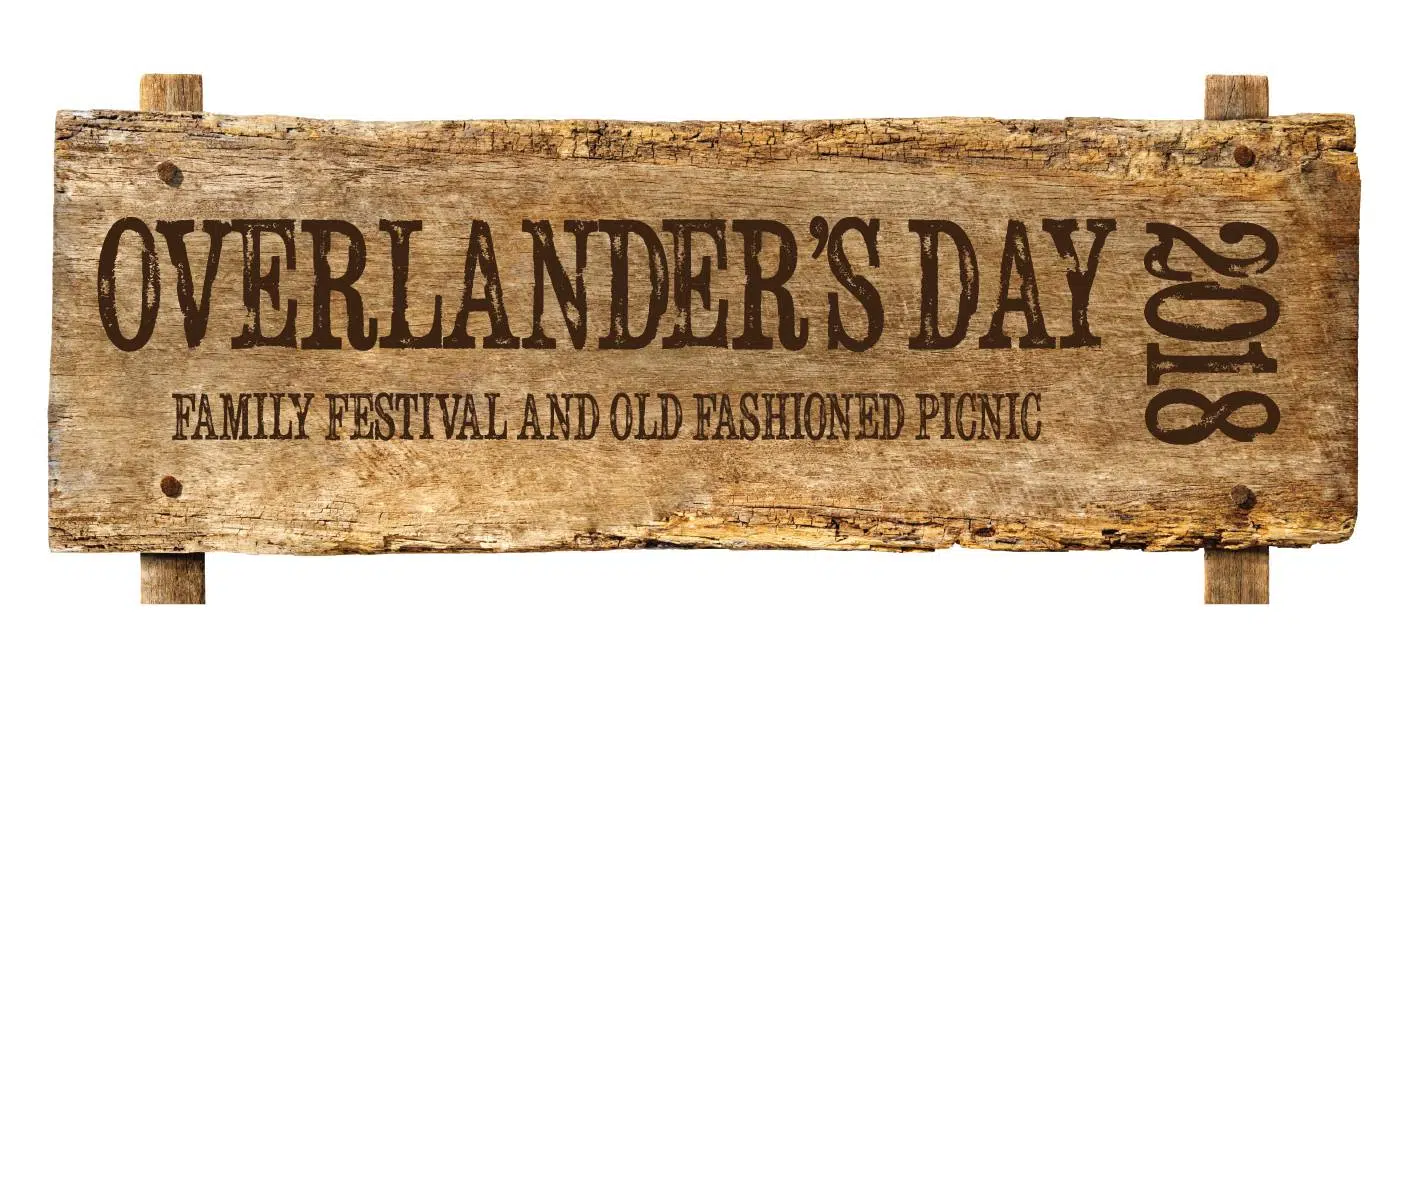 Overlanders Day will be held in Kamloops this year after all